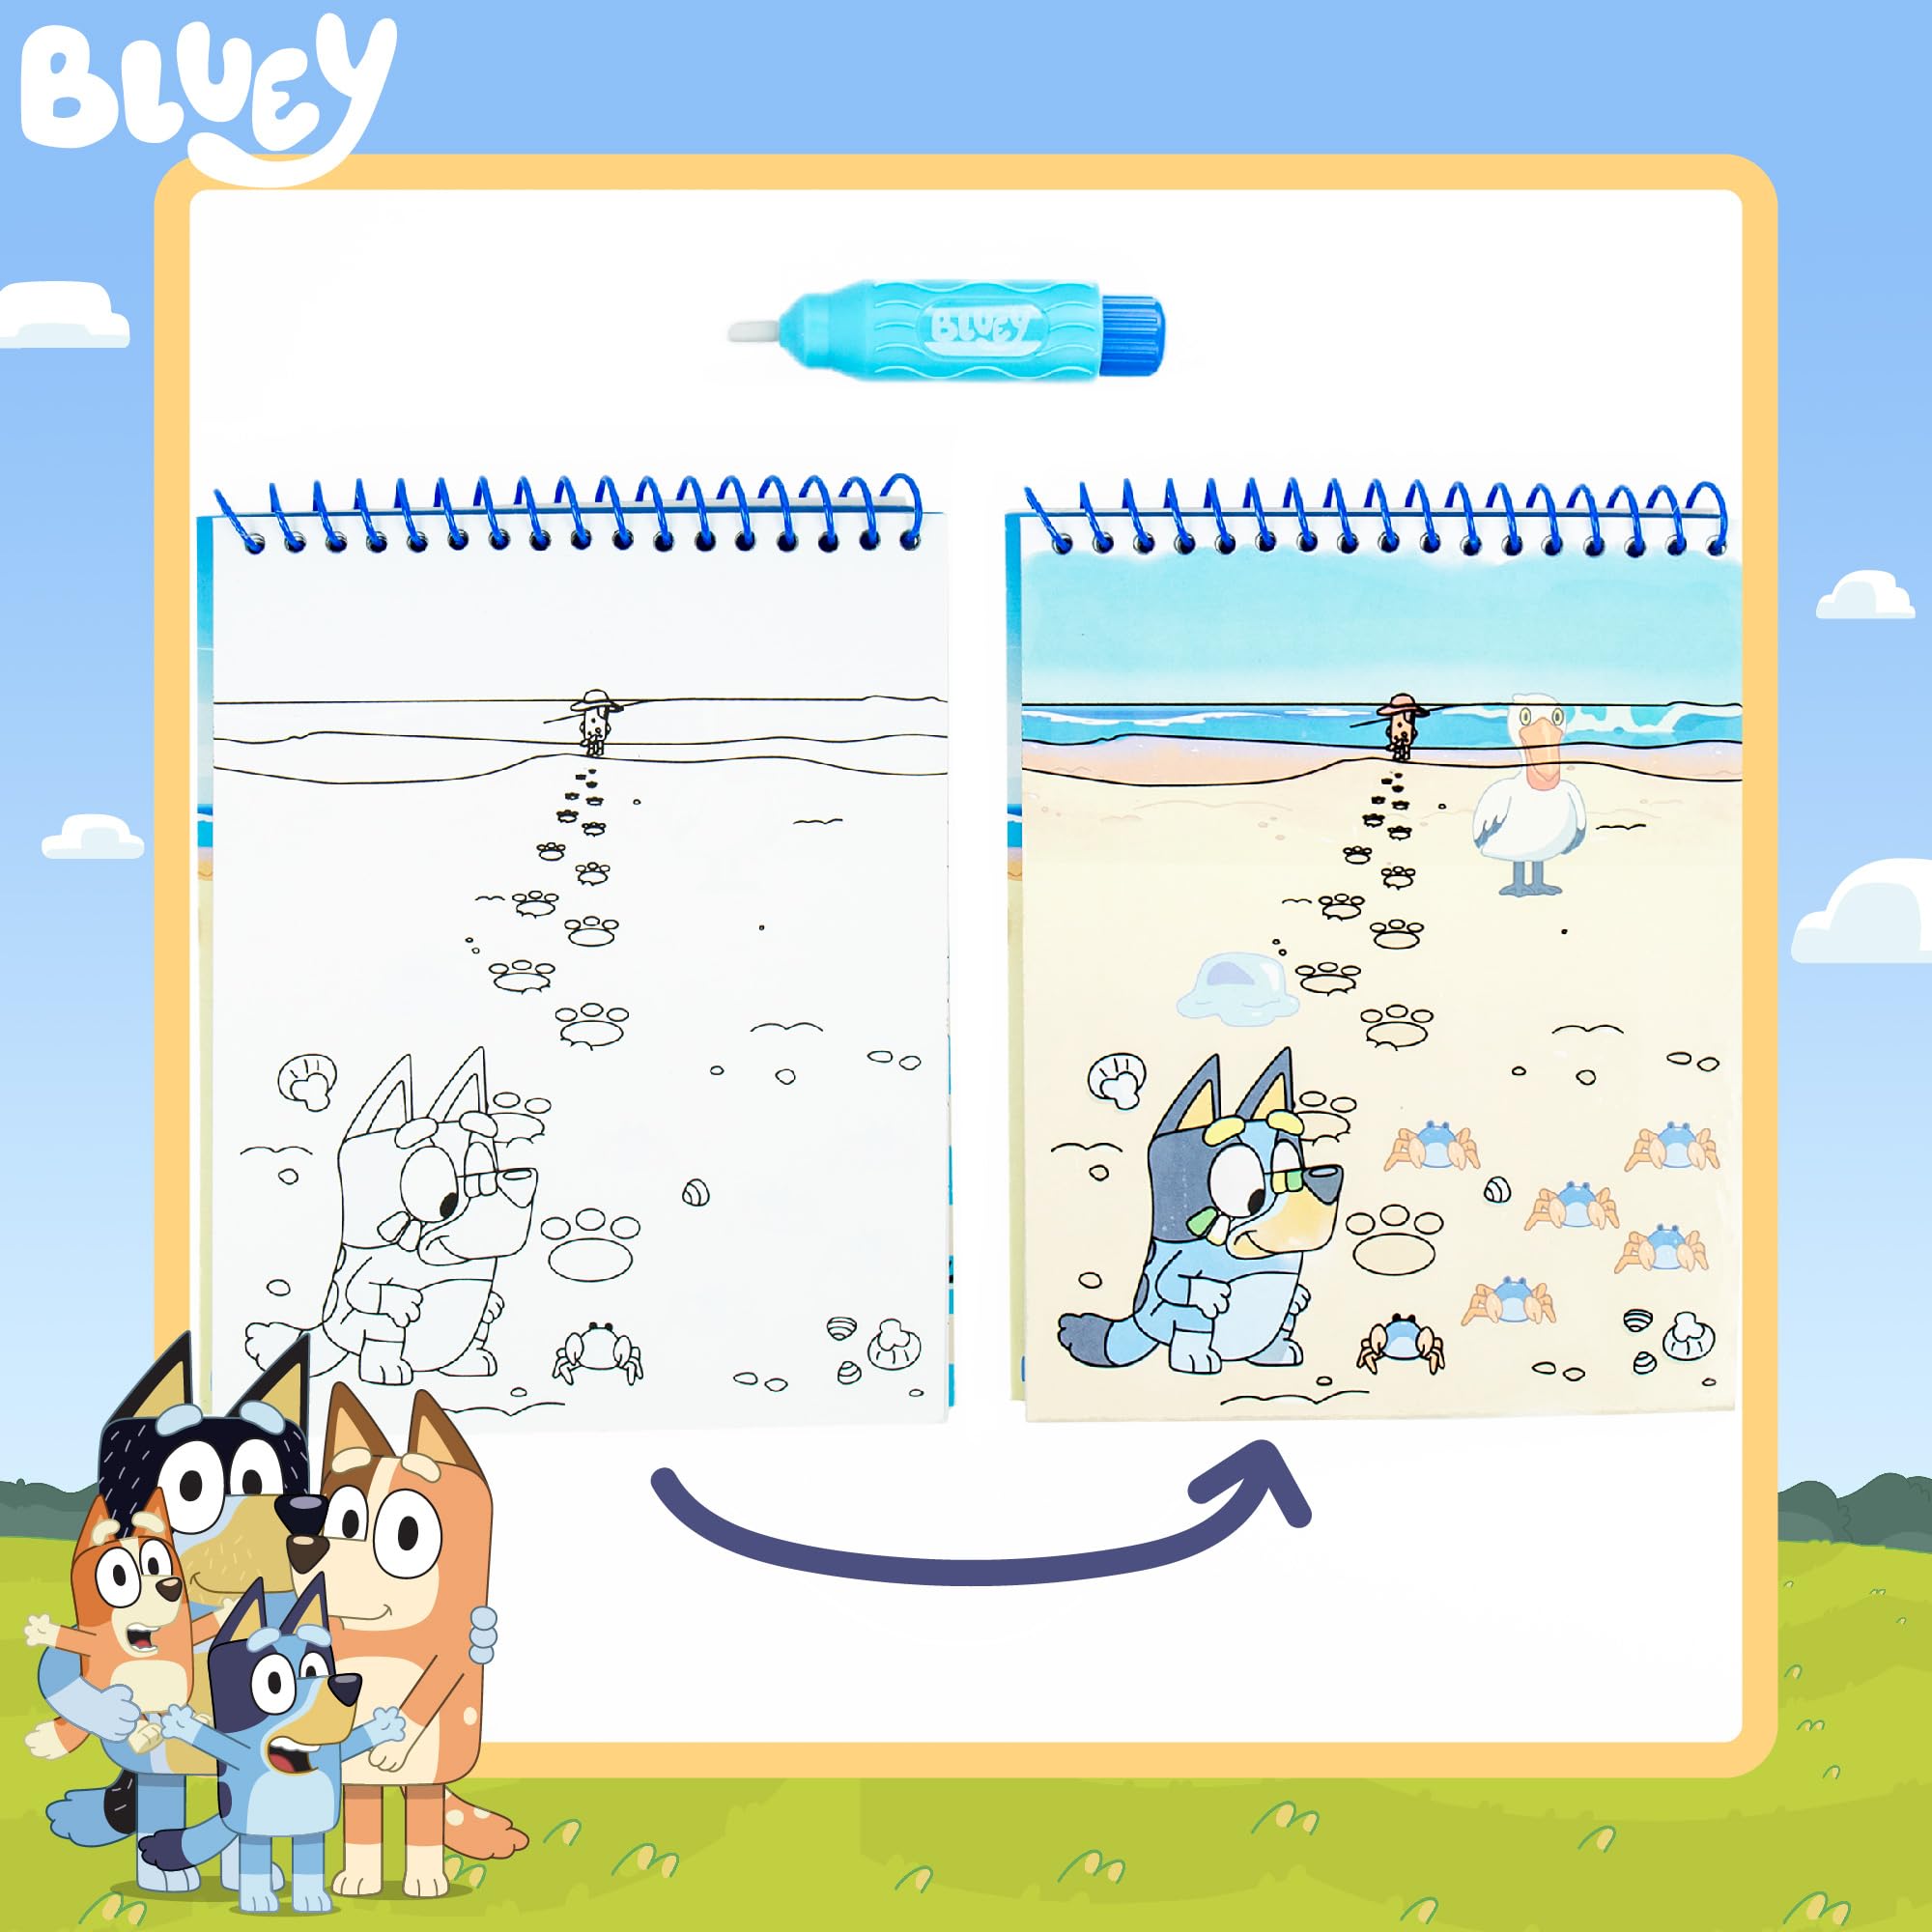 Bluey Aqua Art, Includes 4 Reusable Pages of Water Art & Water Pen, Color with Water Book, Water Reveal Activity Book, Paint with Water Books, Water Doodle Book, Reusable No-Mess Art Book